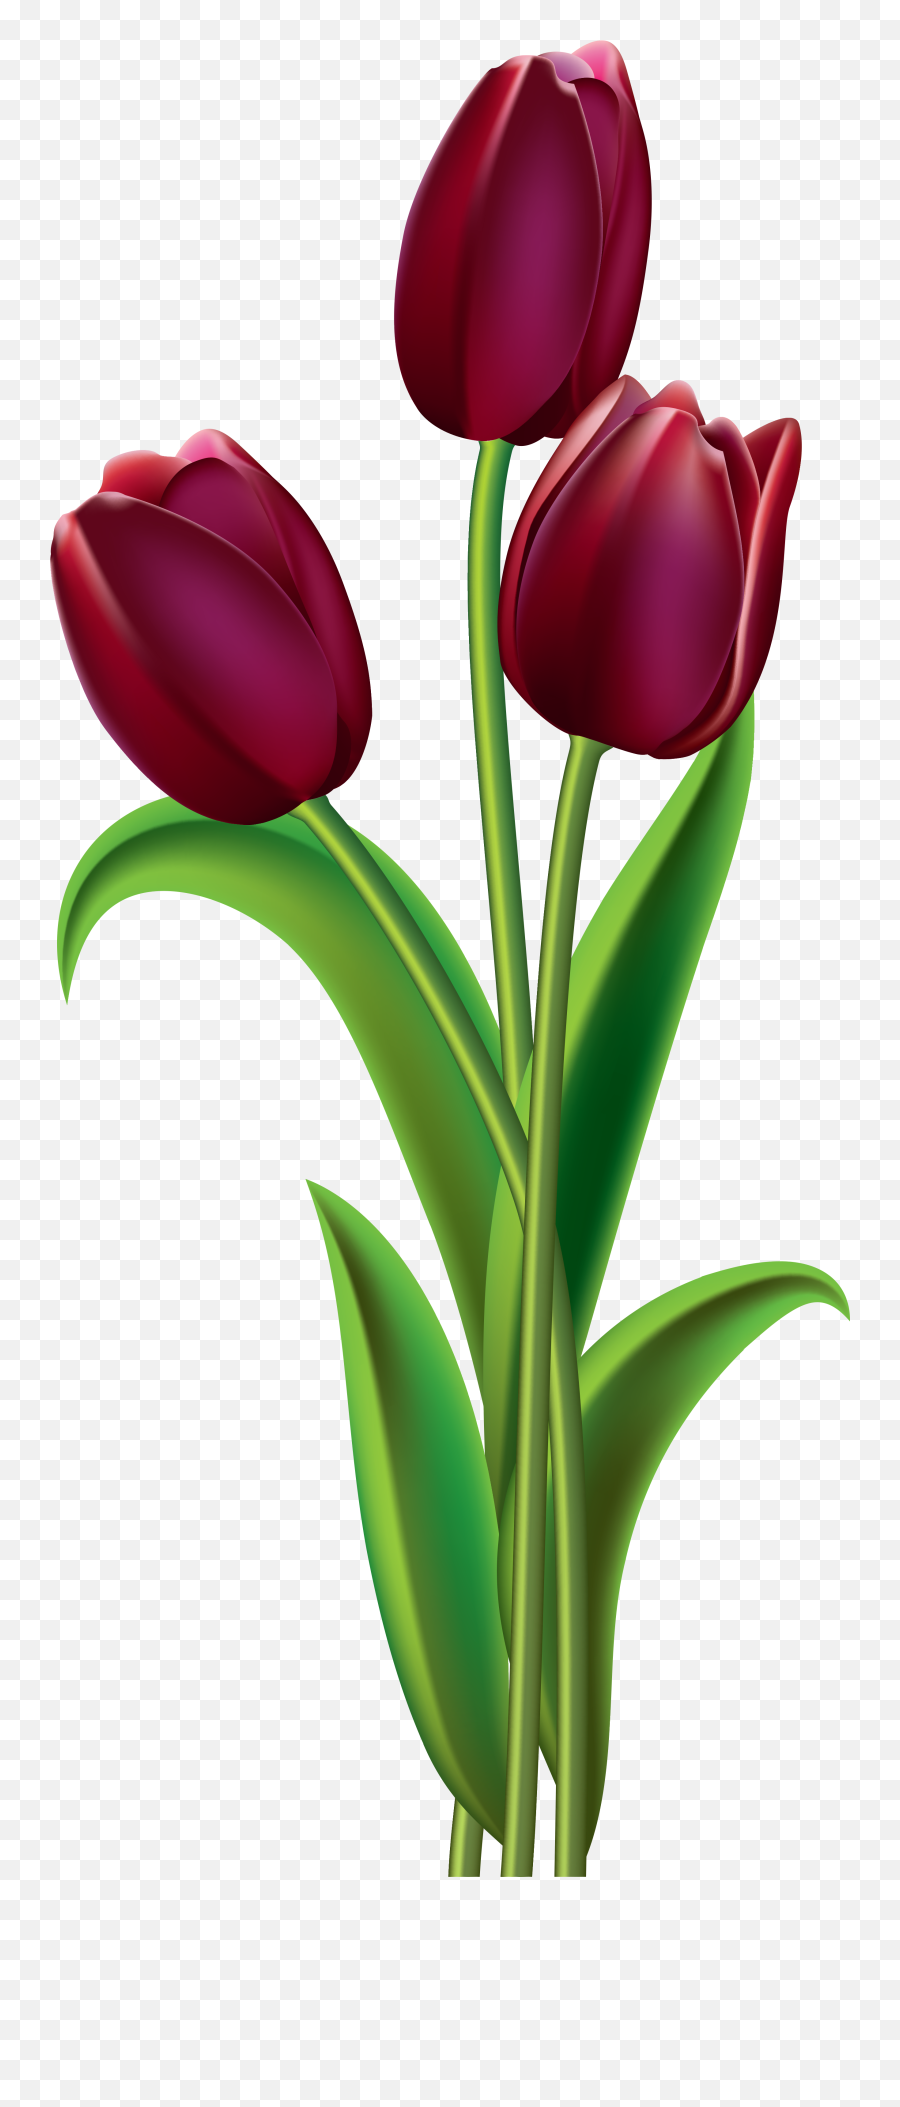 Tulip Flower Png Images Free Gallery - Transparent Background Tulip Flower Clipart Emoji,Tulip Clipart